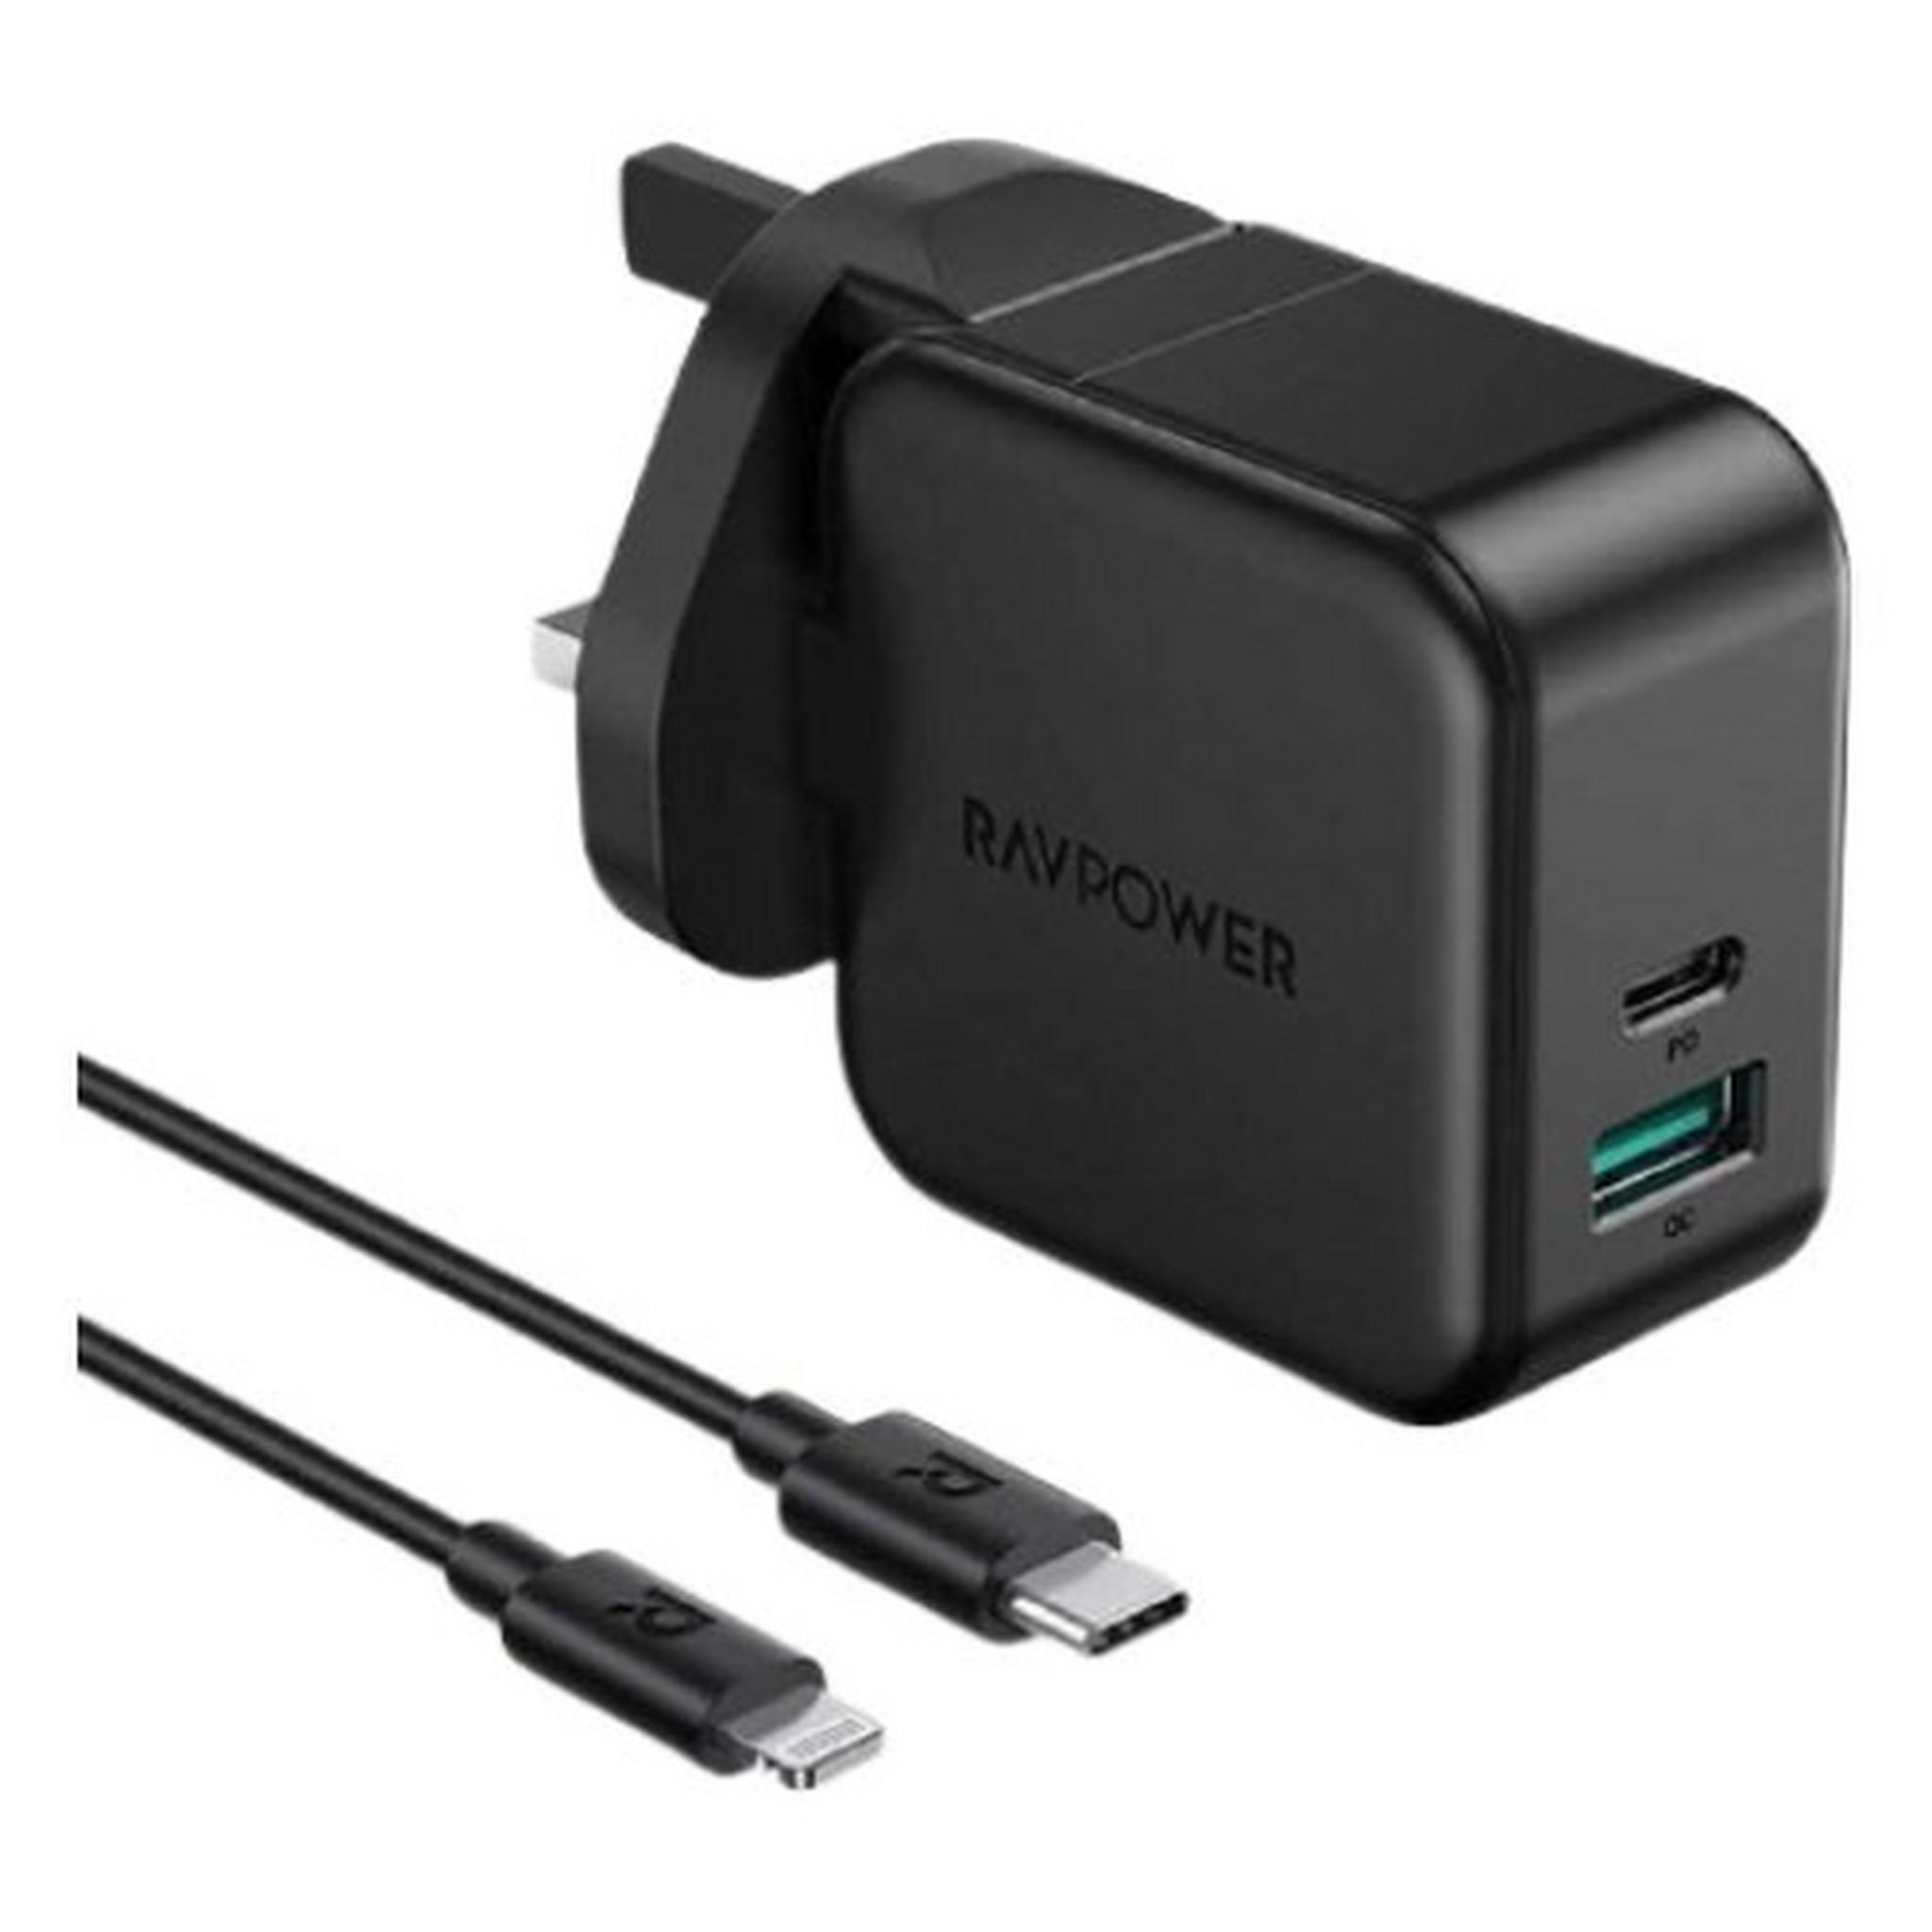 RAVPower PD 18w Charger + 1m USB Cable Combo (RP-PC109) - Black